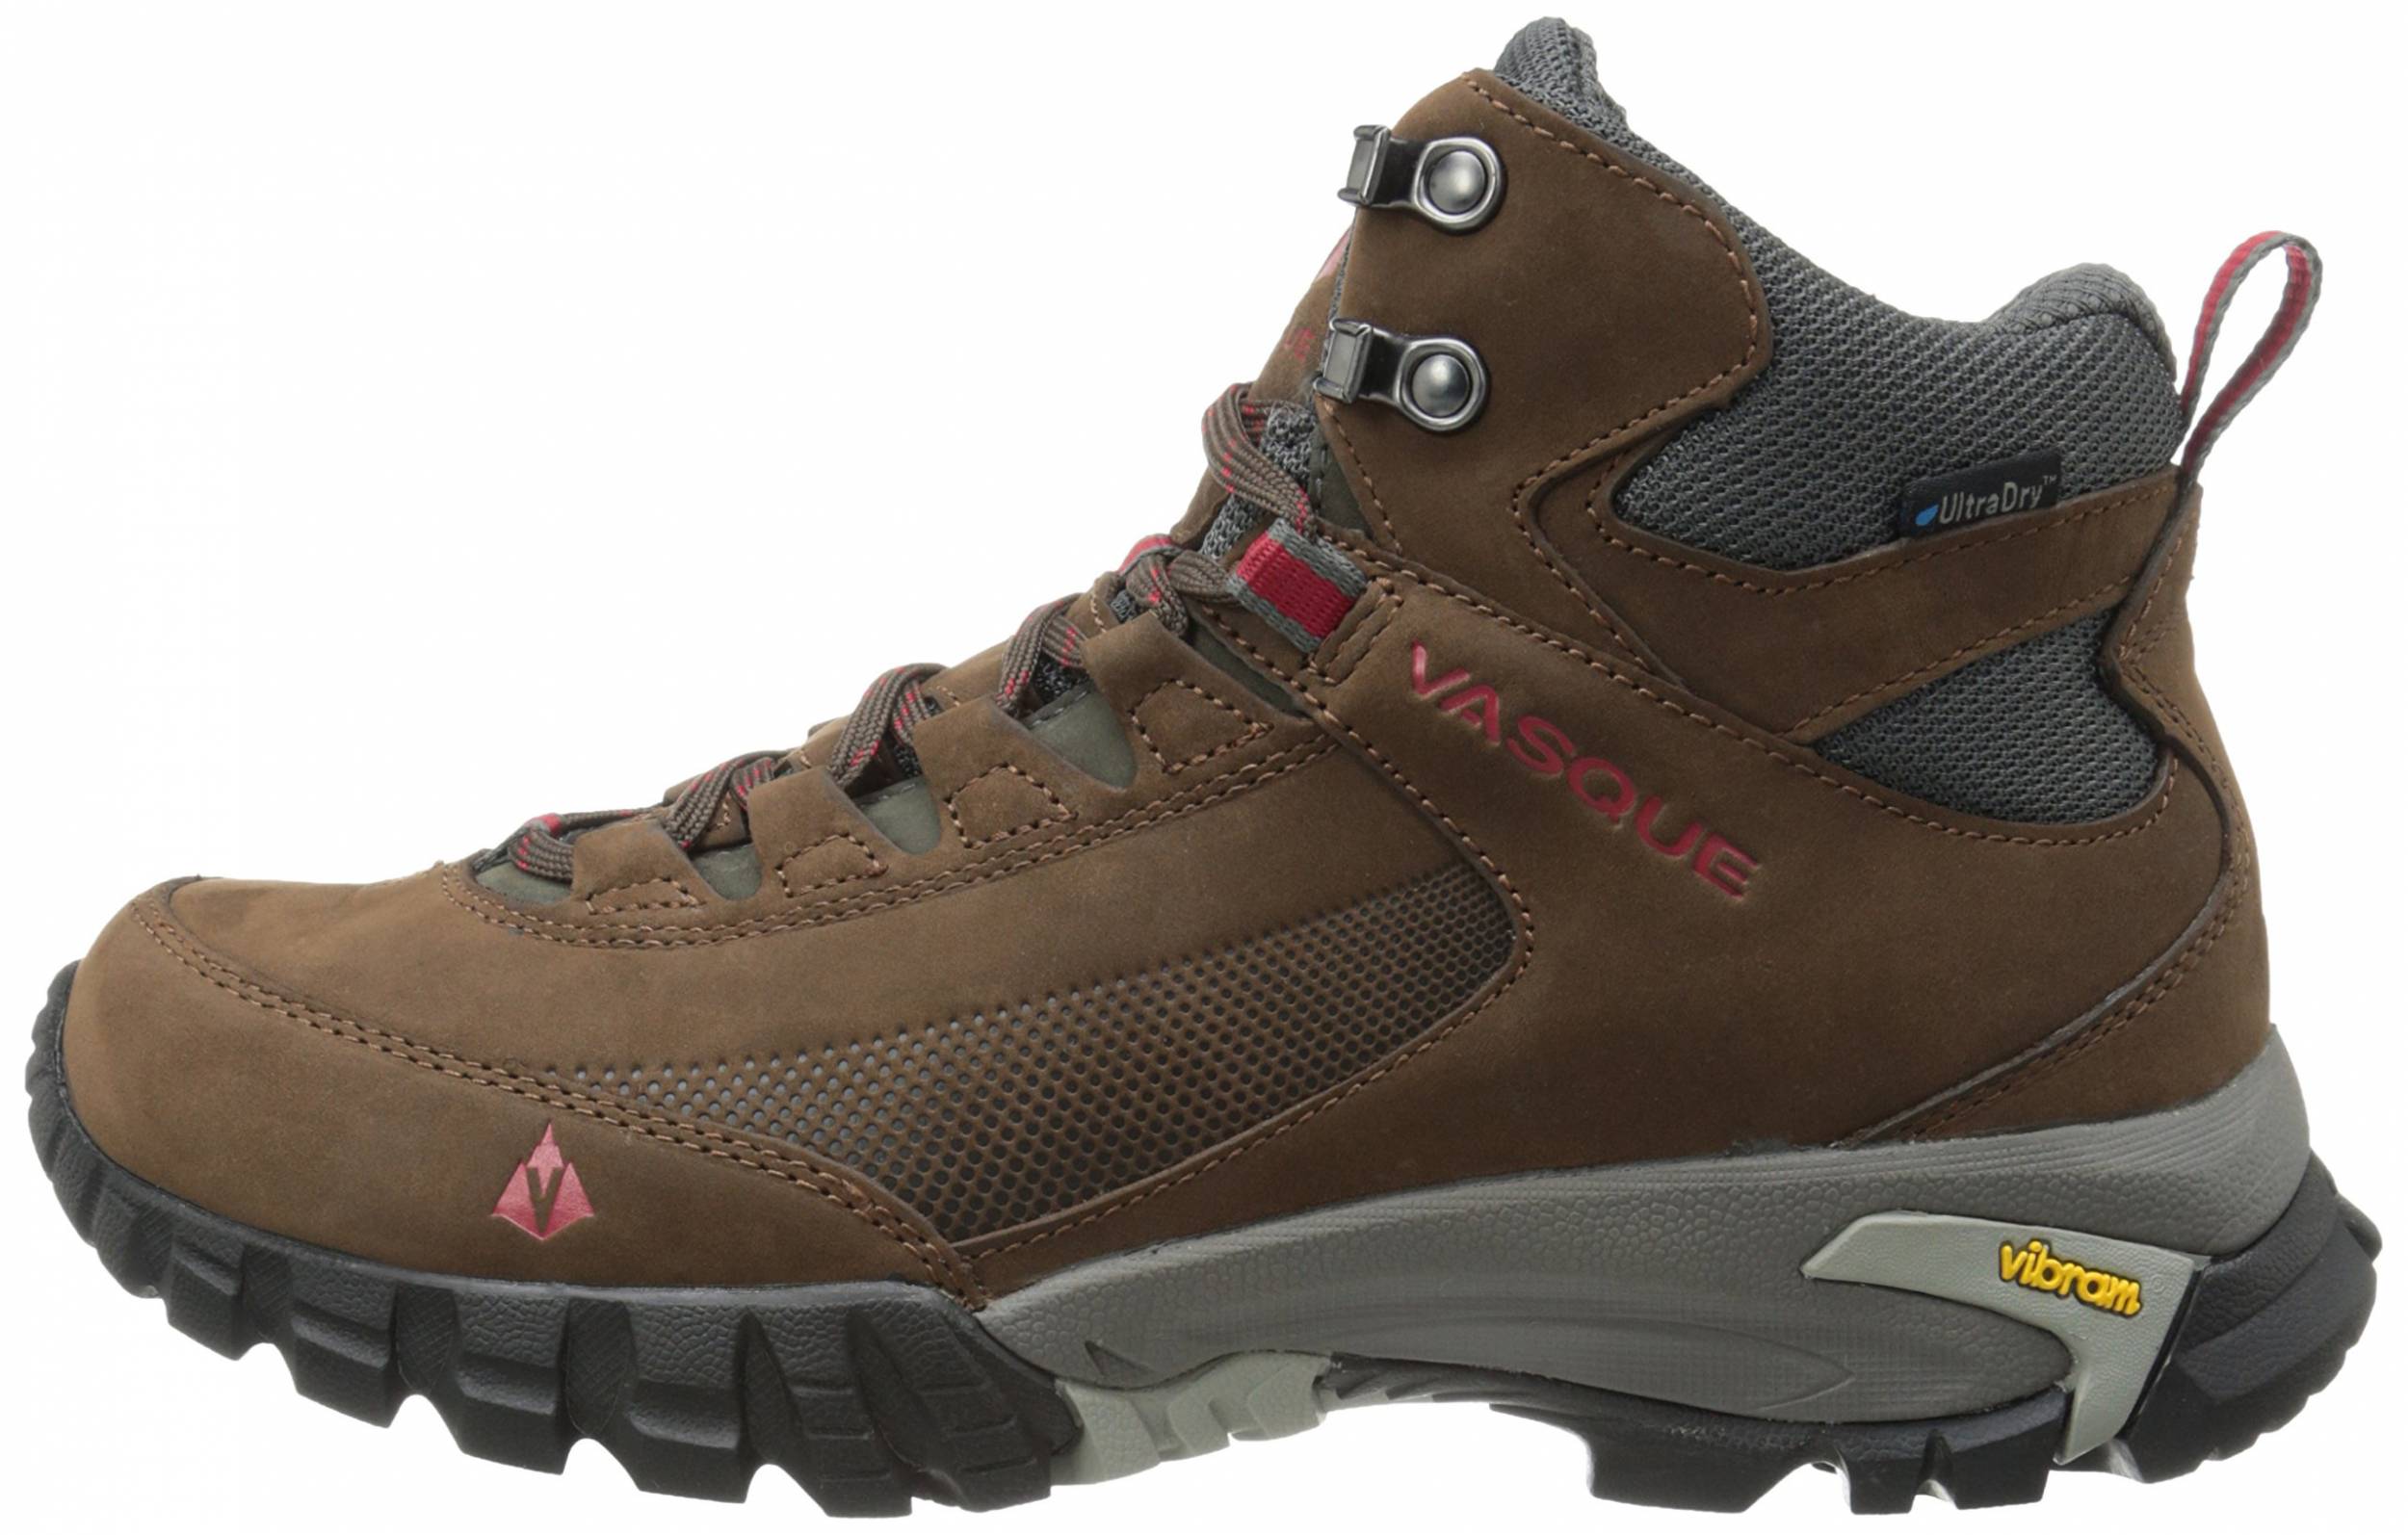 Save 21% on Vasque Hiking Boots (21 